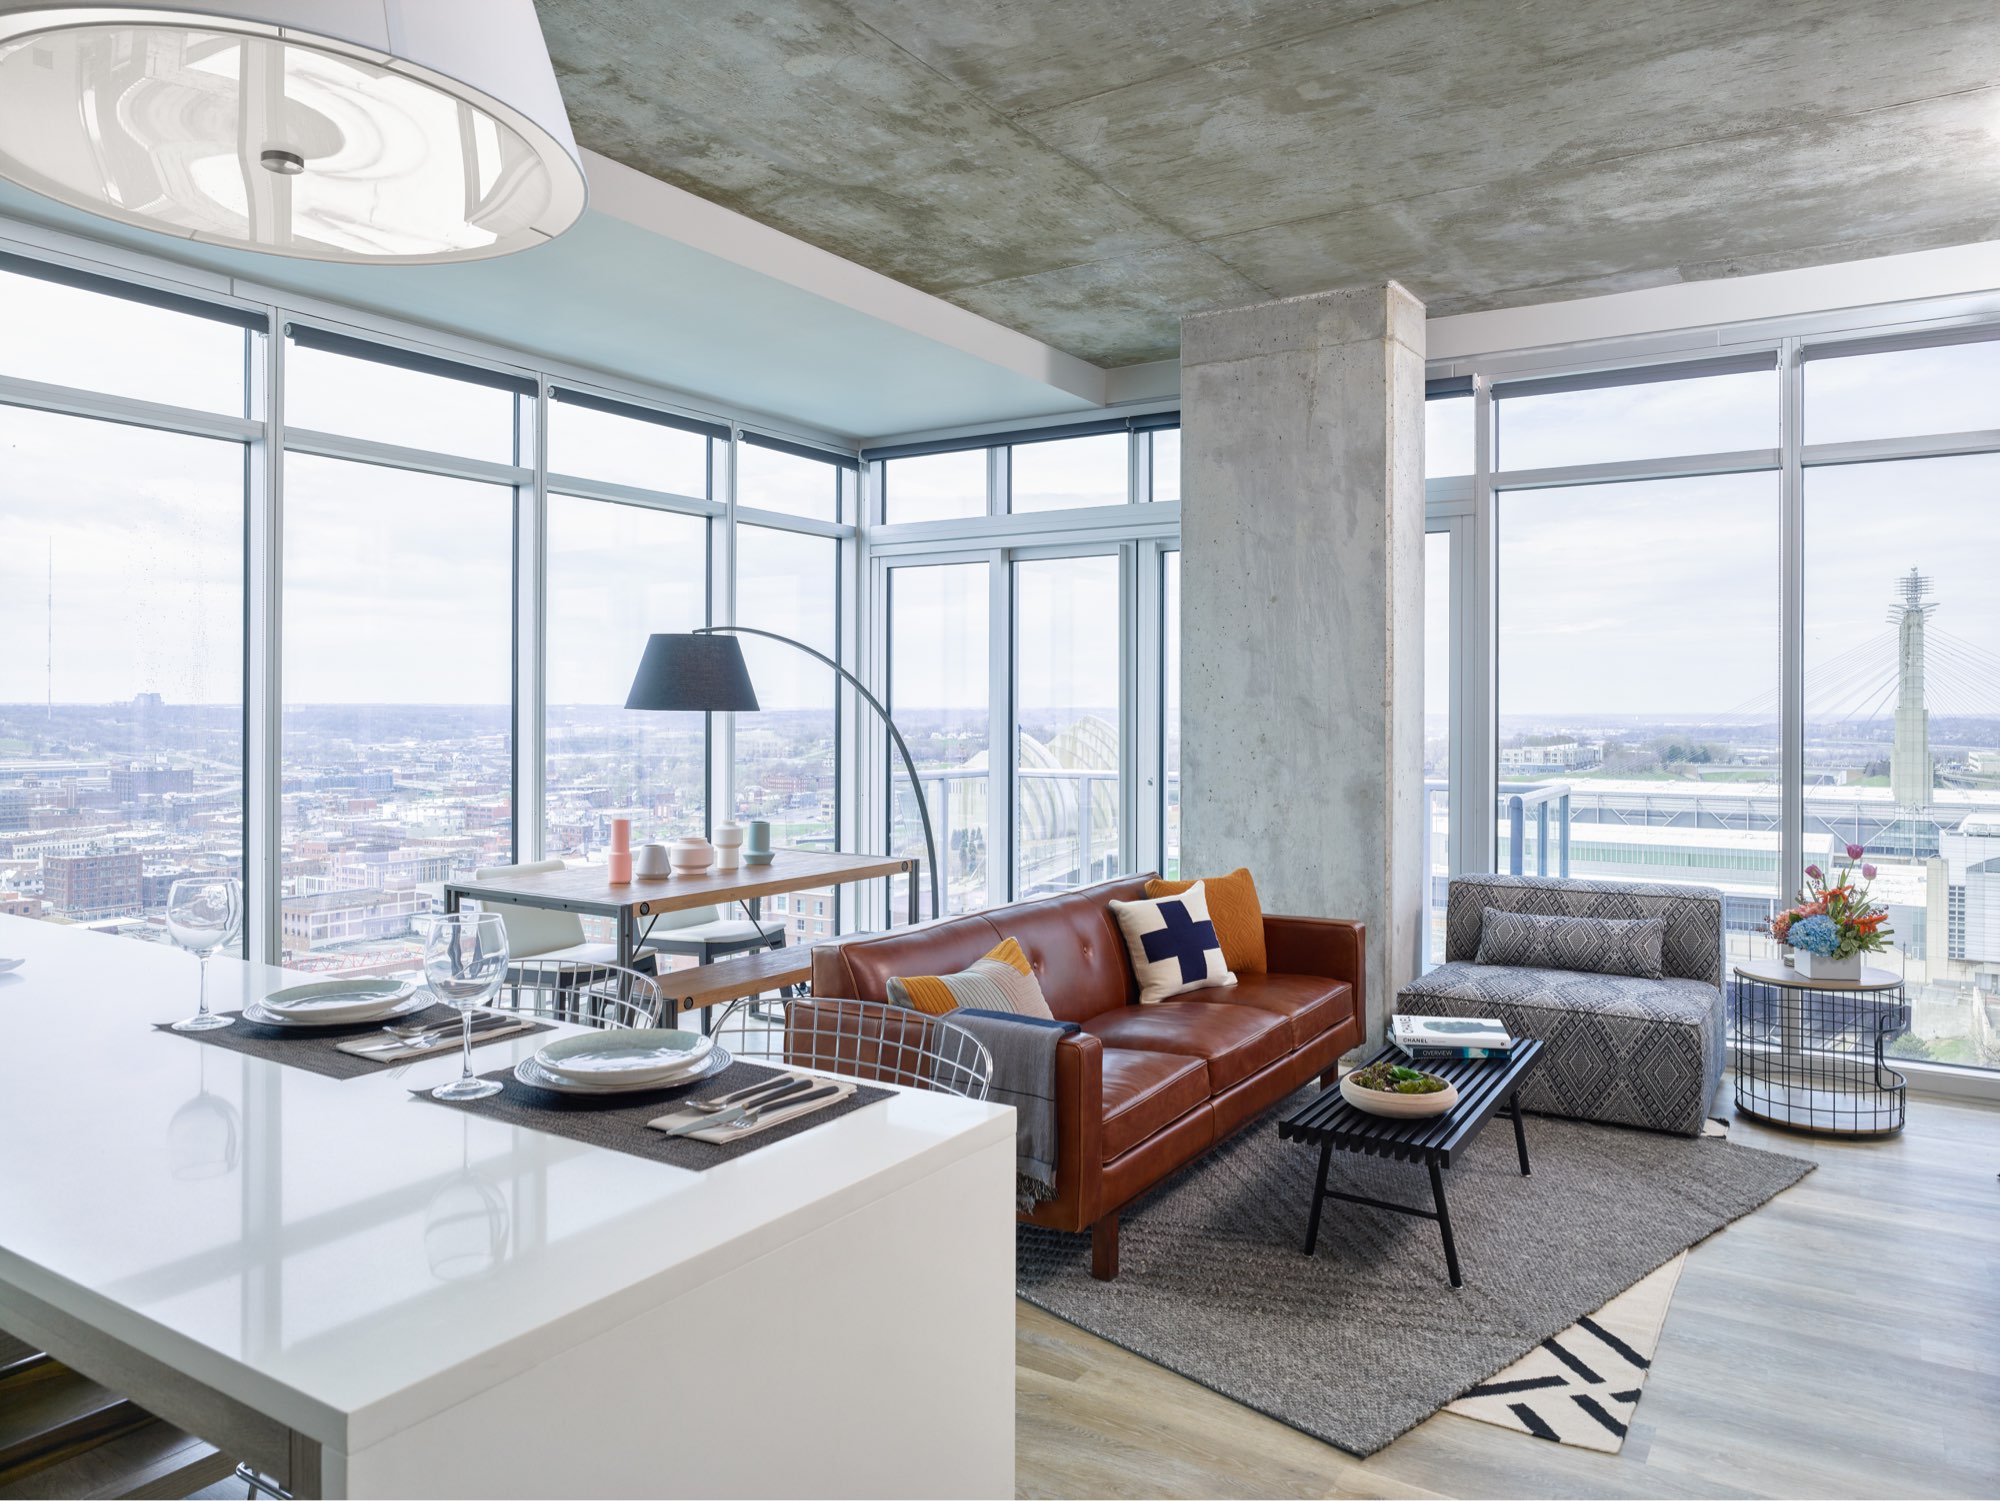 Two Light Luxury Apartments offers Floor-to-Ceiling Windows